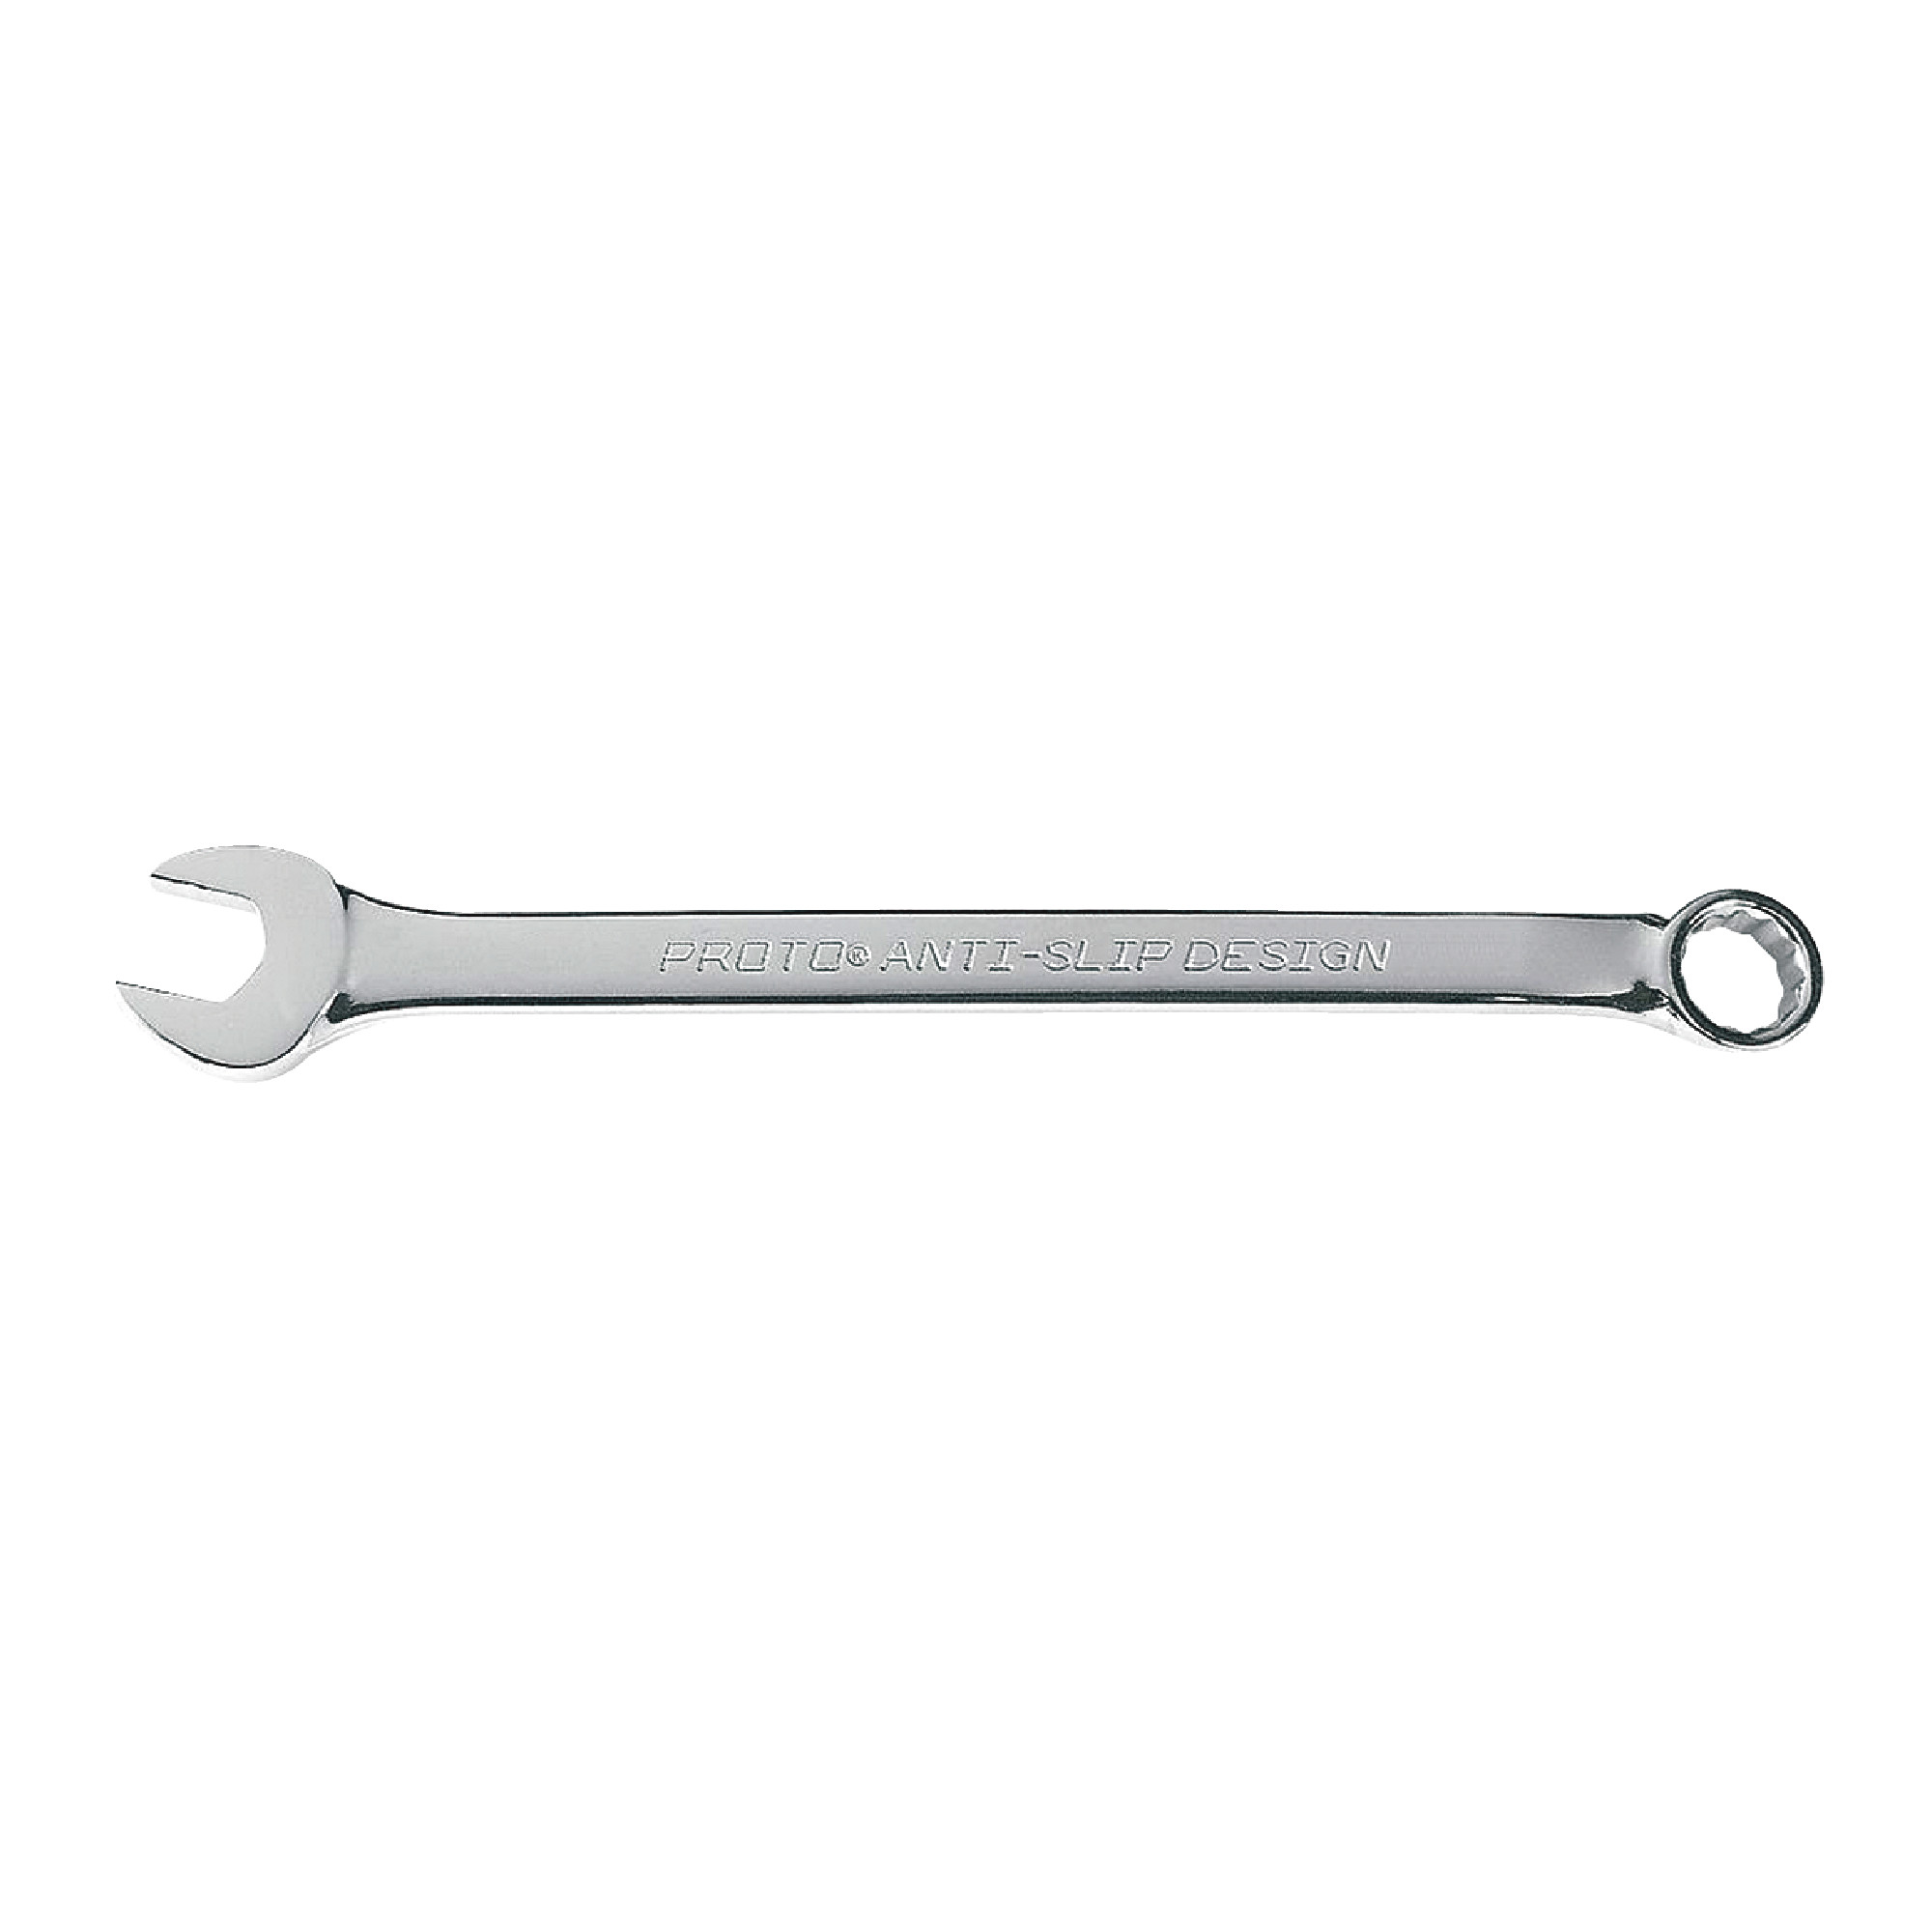 Satin Chrome Finish 22mm Combination Wrench